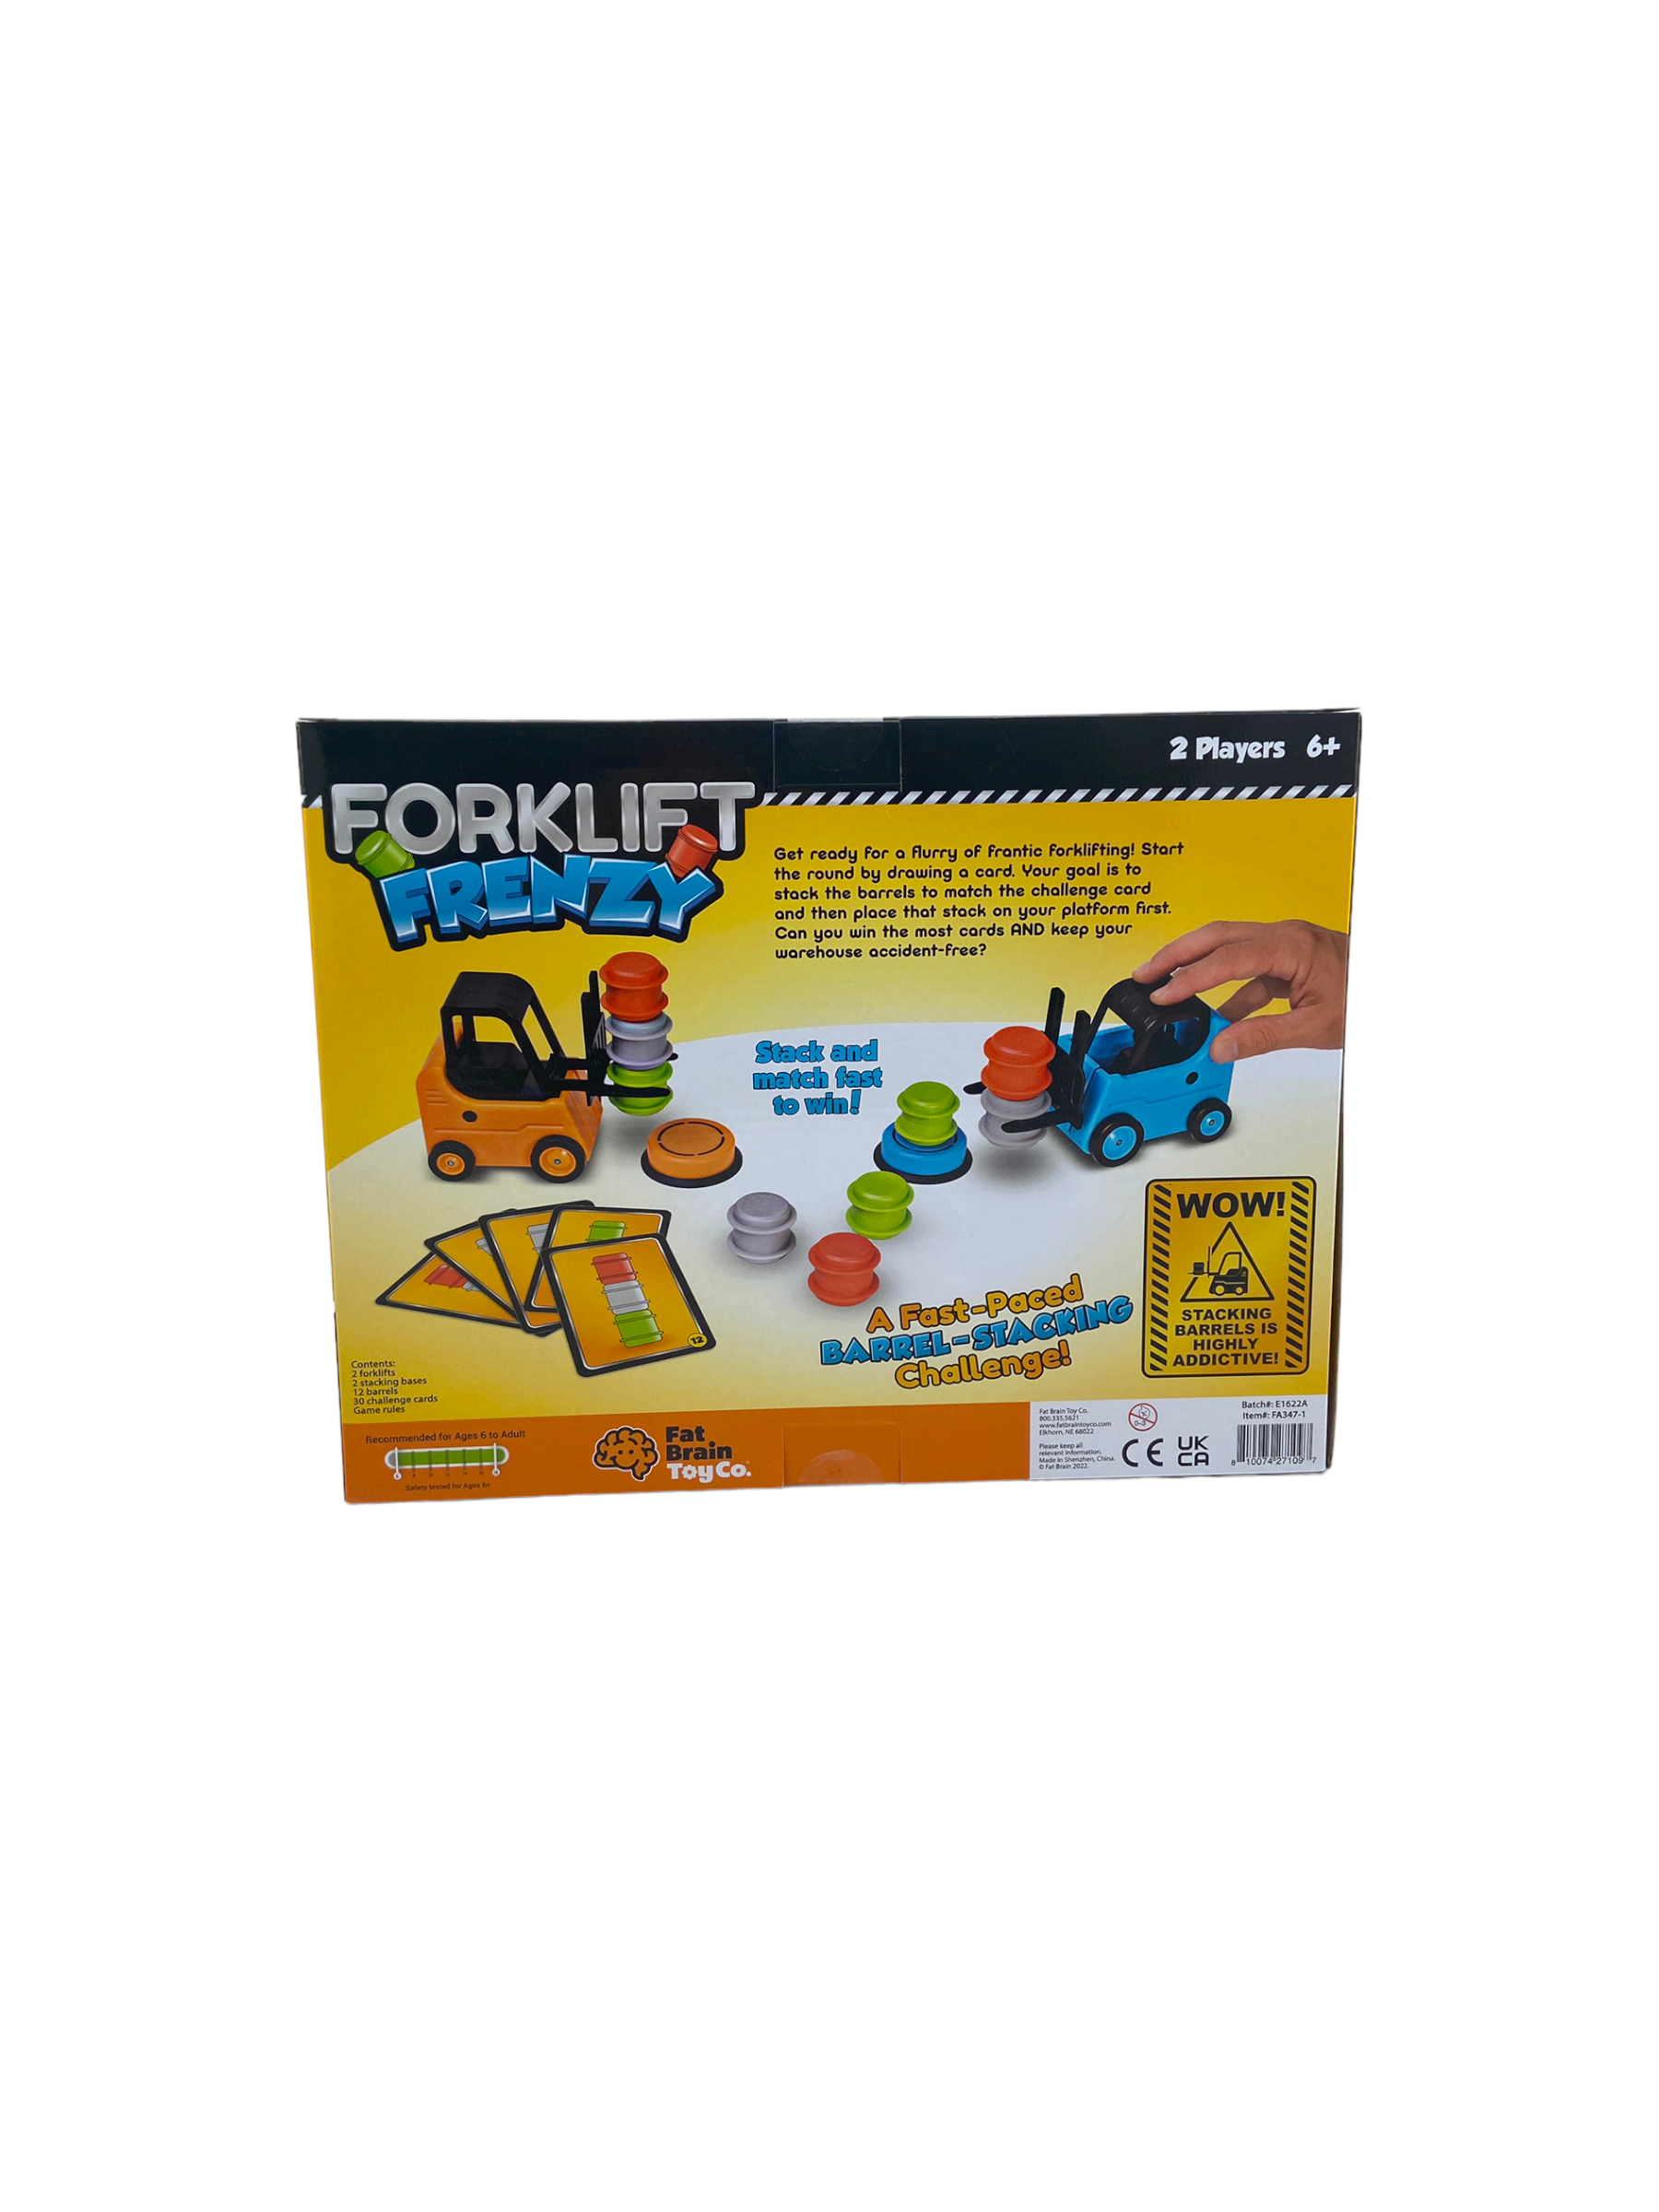 A fun new game arrived! FORKLIFT FRENZY! Get ready for a flurry of frantic  forklifting! Start the round by drawing a card. Your goal is to stack  the